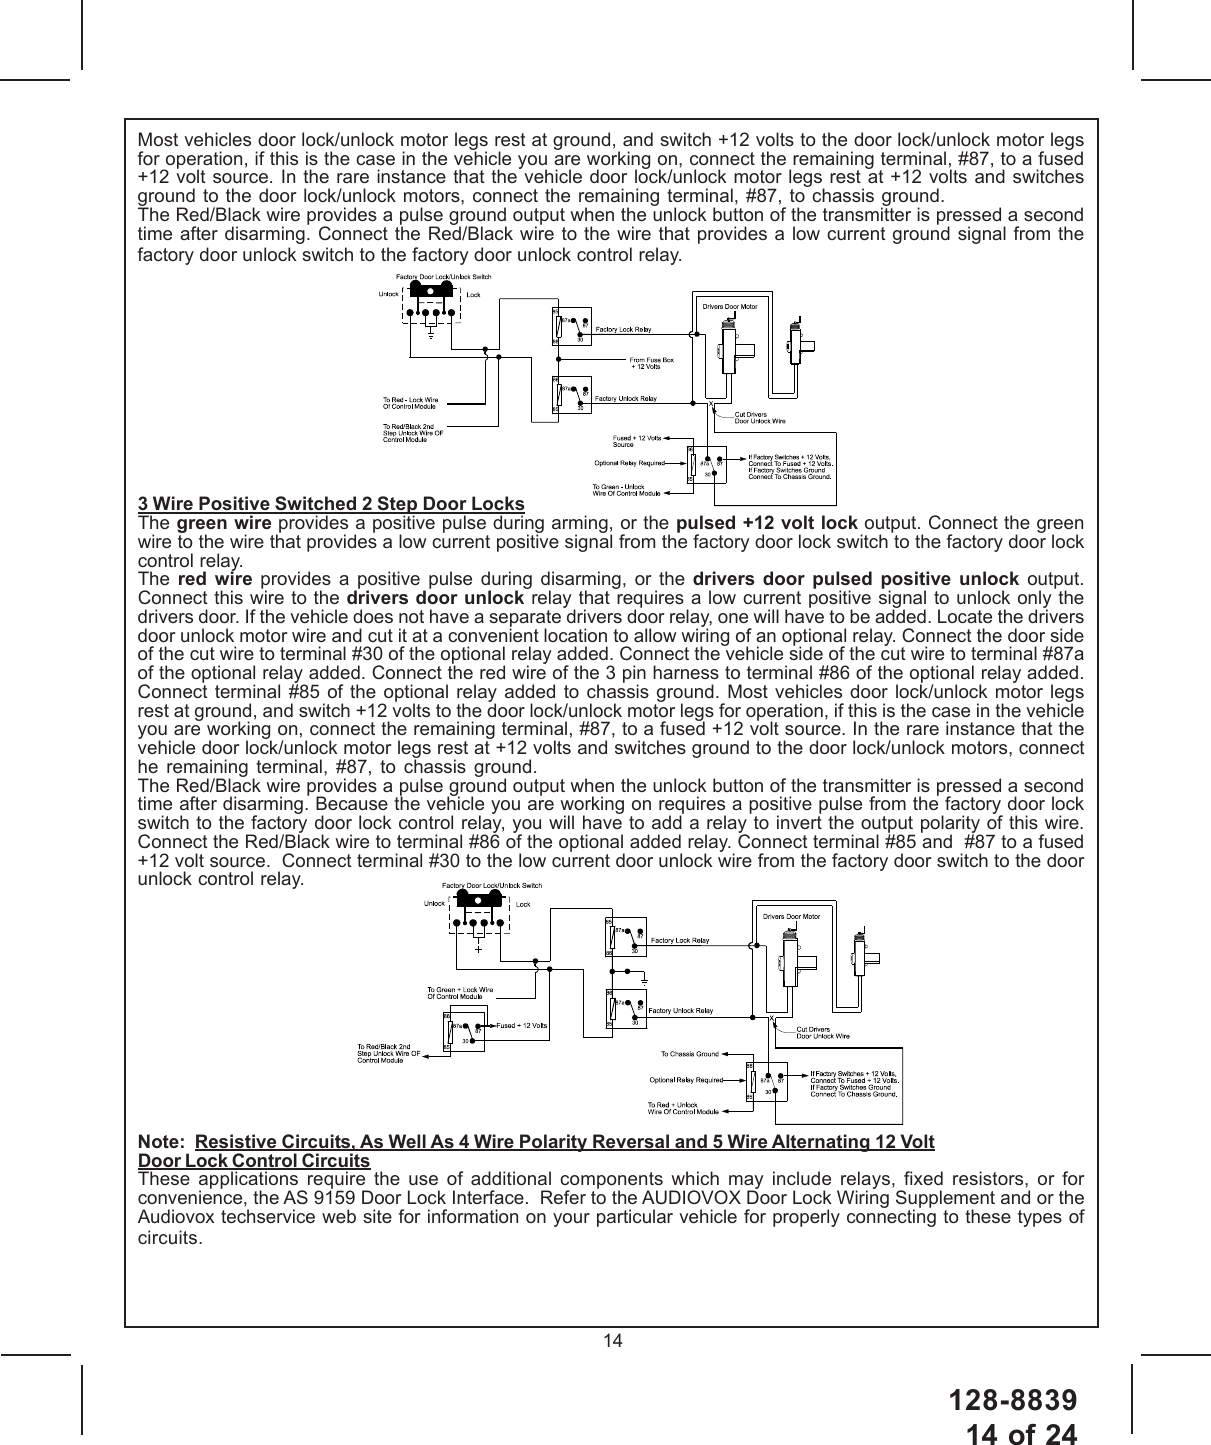 128-883914 of 2414Most vehicles door lock/unlock motor legs rest at ground, and switch +12 volts to the door lock/unlock motor legsfor operation, if this is the case in the vehicle you are working on, connect the remaining terminal, #87, to a fused+12 volt source. In the rare instance that the vehicle door lock/unlock motor legs rest at +12 volts and switchesground to the door lock/unlock motors, connect the remaining terminal, #87, to chassis ground.The Red/Black wire provides a pulse ground output when the unlock button of the transmitter is pressed a secondtime after disarming. Connect the Red/Black wire to the wire that provides a low current ground signal from thefactory door unlock switch to the factory door unlock control relay.3 Wire Positive Switched 2 Step Door LocksThe green wire provides a positive pulse during arming, or the pulsed +12 volt lock output. Connect the greenwire to the wire that provides a low current positive signal from the factory door lock switch to the factory door lockcontrol relay.The  red wire provides a positive pulse during disarming, or the drivers door pulsed positive unlock output.Connect this wire to the drivers door unlock relay that requires a low current positive signal to unlock only thedrivers door. If the vehicle does not have a separate drivers door relay, one will have to be added. Locate the driversdoor unlock motor wire and cut it at a convenient location to allow wiring of an optional relay. Connect the door sideof the cut wire to terminal #30 of the optional relay added. Connect the vehicle side of the cut wire to terminal #87aof the optional relay added. Connect the red wire of the 3 pin harness to terminal #86 of the optional relay added.Connect terminal #85 of the optional relay added to chassis ground. Most vehicles door lock/unlock motor legsrest at ground, and switch +12 volts to the door lock/unlock motor legs for operation, if this is the case in the vehicleyou are working on, connect the remaining terminal, #87, to a fused +12 volt source. In the rare instance that thevehicle door lock/unlock motor legs rest at +12 volts and switches ground to the door lock/unlock motors, connecthe remaining terminal, #87, to chassis ground.The Red/Black wire provides a pulse ground output when the unlock button of the transmitter is pressed a secondtime after disarming. Because the vehicle you are working on requires a positive pulse from the factory door lockswitch to the factory door lock control relay, you will have to add a relay to invert the output polarity of this wire.Connect the Red/Black wire to terminal #86 of the optional added relay. Connect terminal #85 and  #87 to a fused+12 volt source.  Connect terminal #30 to the low current door unlock wire from the factory door switch to the doorunlock control relay.Note:  Resistive Circuits, As Well As 4 Wire Polarity Reversal and 5 Wire Alternating 12 VoltDoor Lock Control CircuitsThese applications require the use of additional components which may include relays, fixed resistors, or forconvenience, the AS 9159 Door Lock Interface.  Refer to the AUDIOVOX Door Lock Wiring Supplement and or theAudiovox techservice web site for information on your particular vehicle for properly connecting to these types ofcircuits.